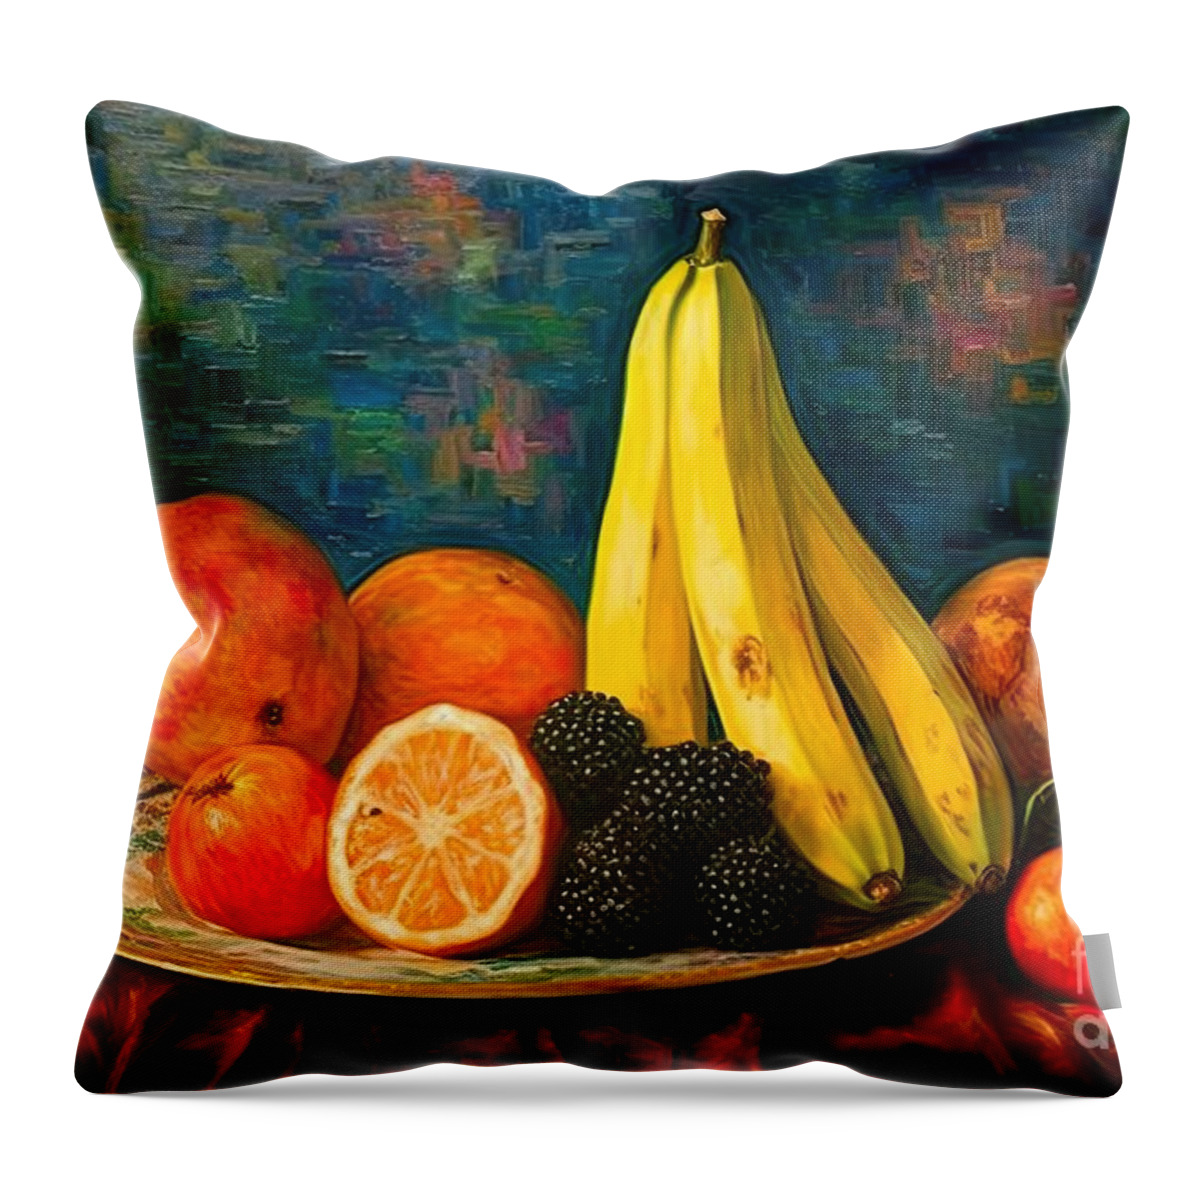 Fruits Throw Pillow featuring the painting Fruits Painting by N Akkash